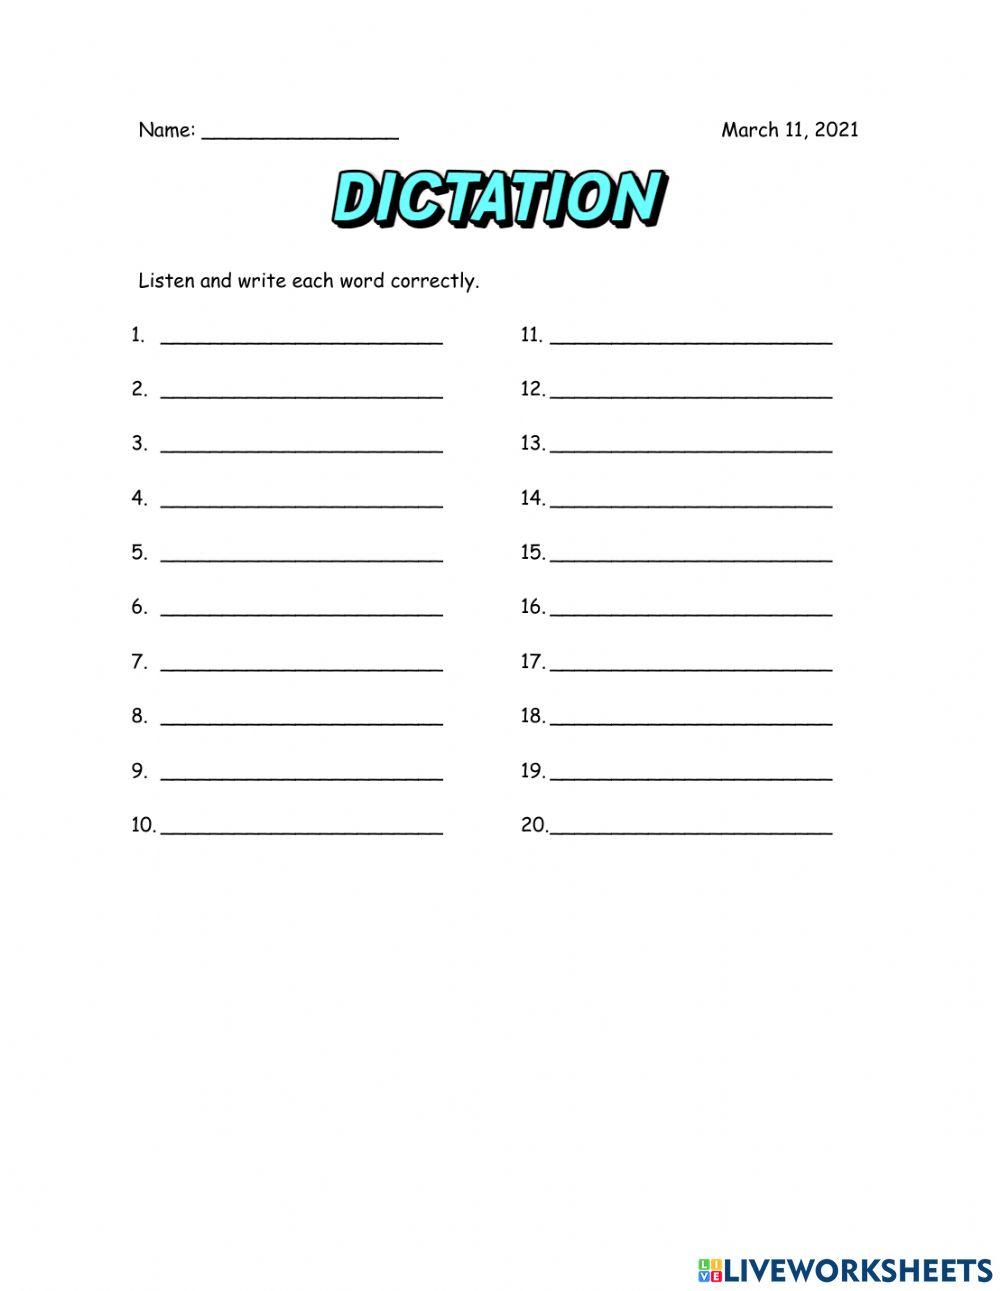 Dictation 2nd 03-11